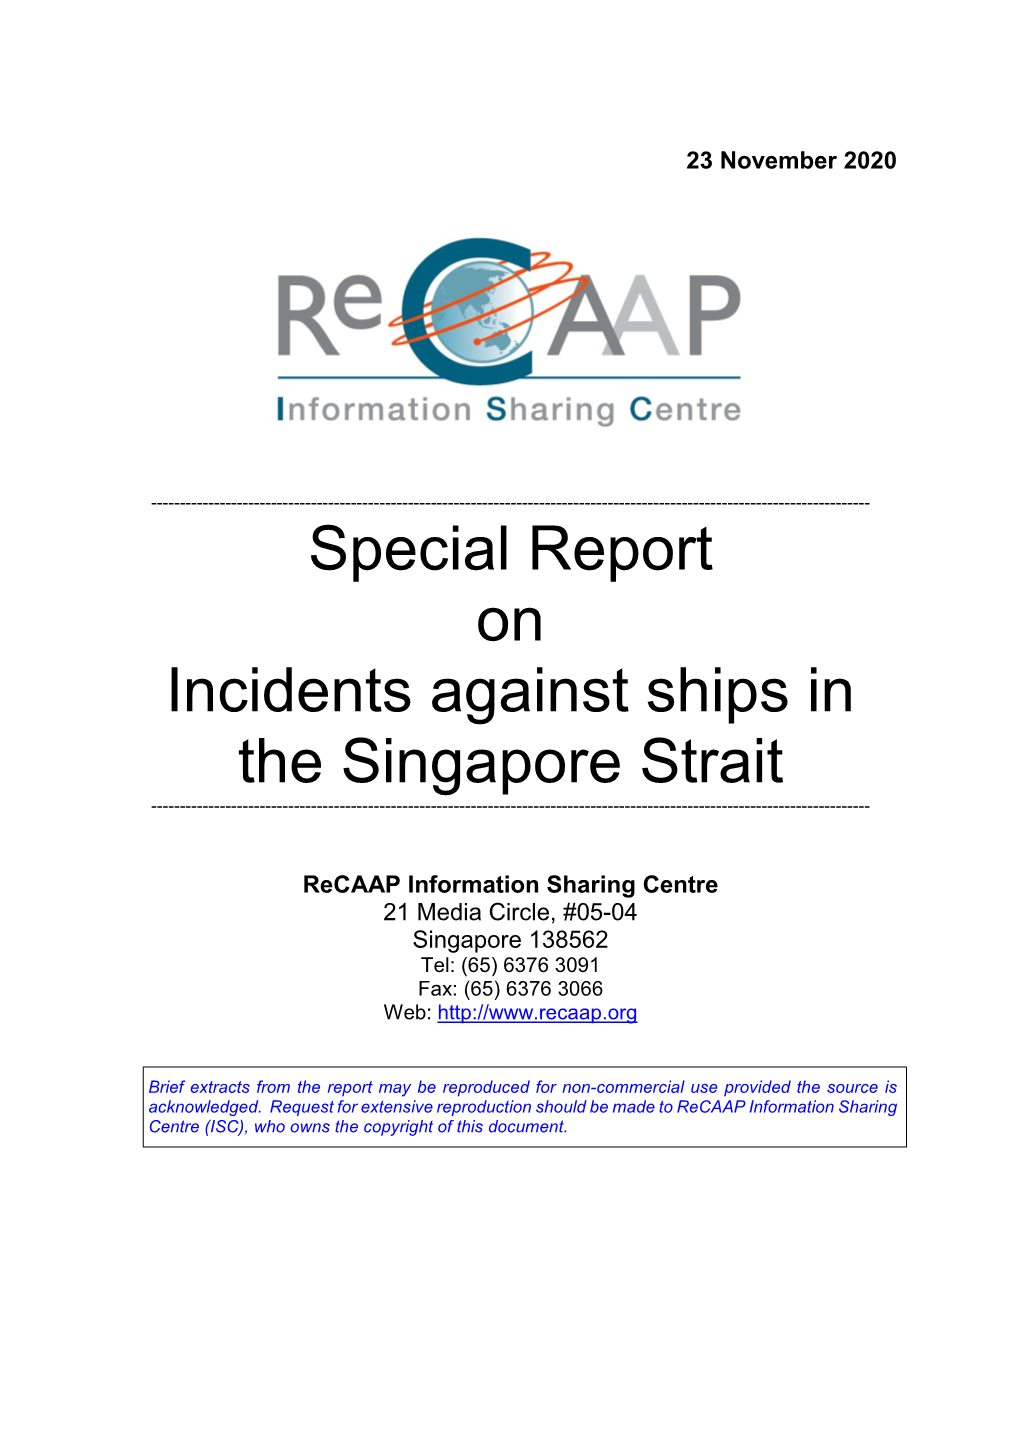 Special Report on Incidents Against Ships in the Singapore Strait